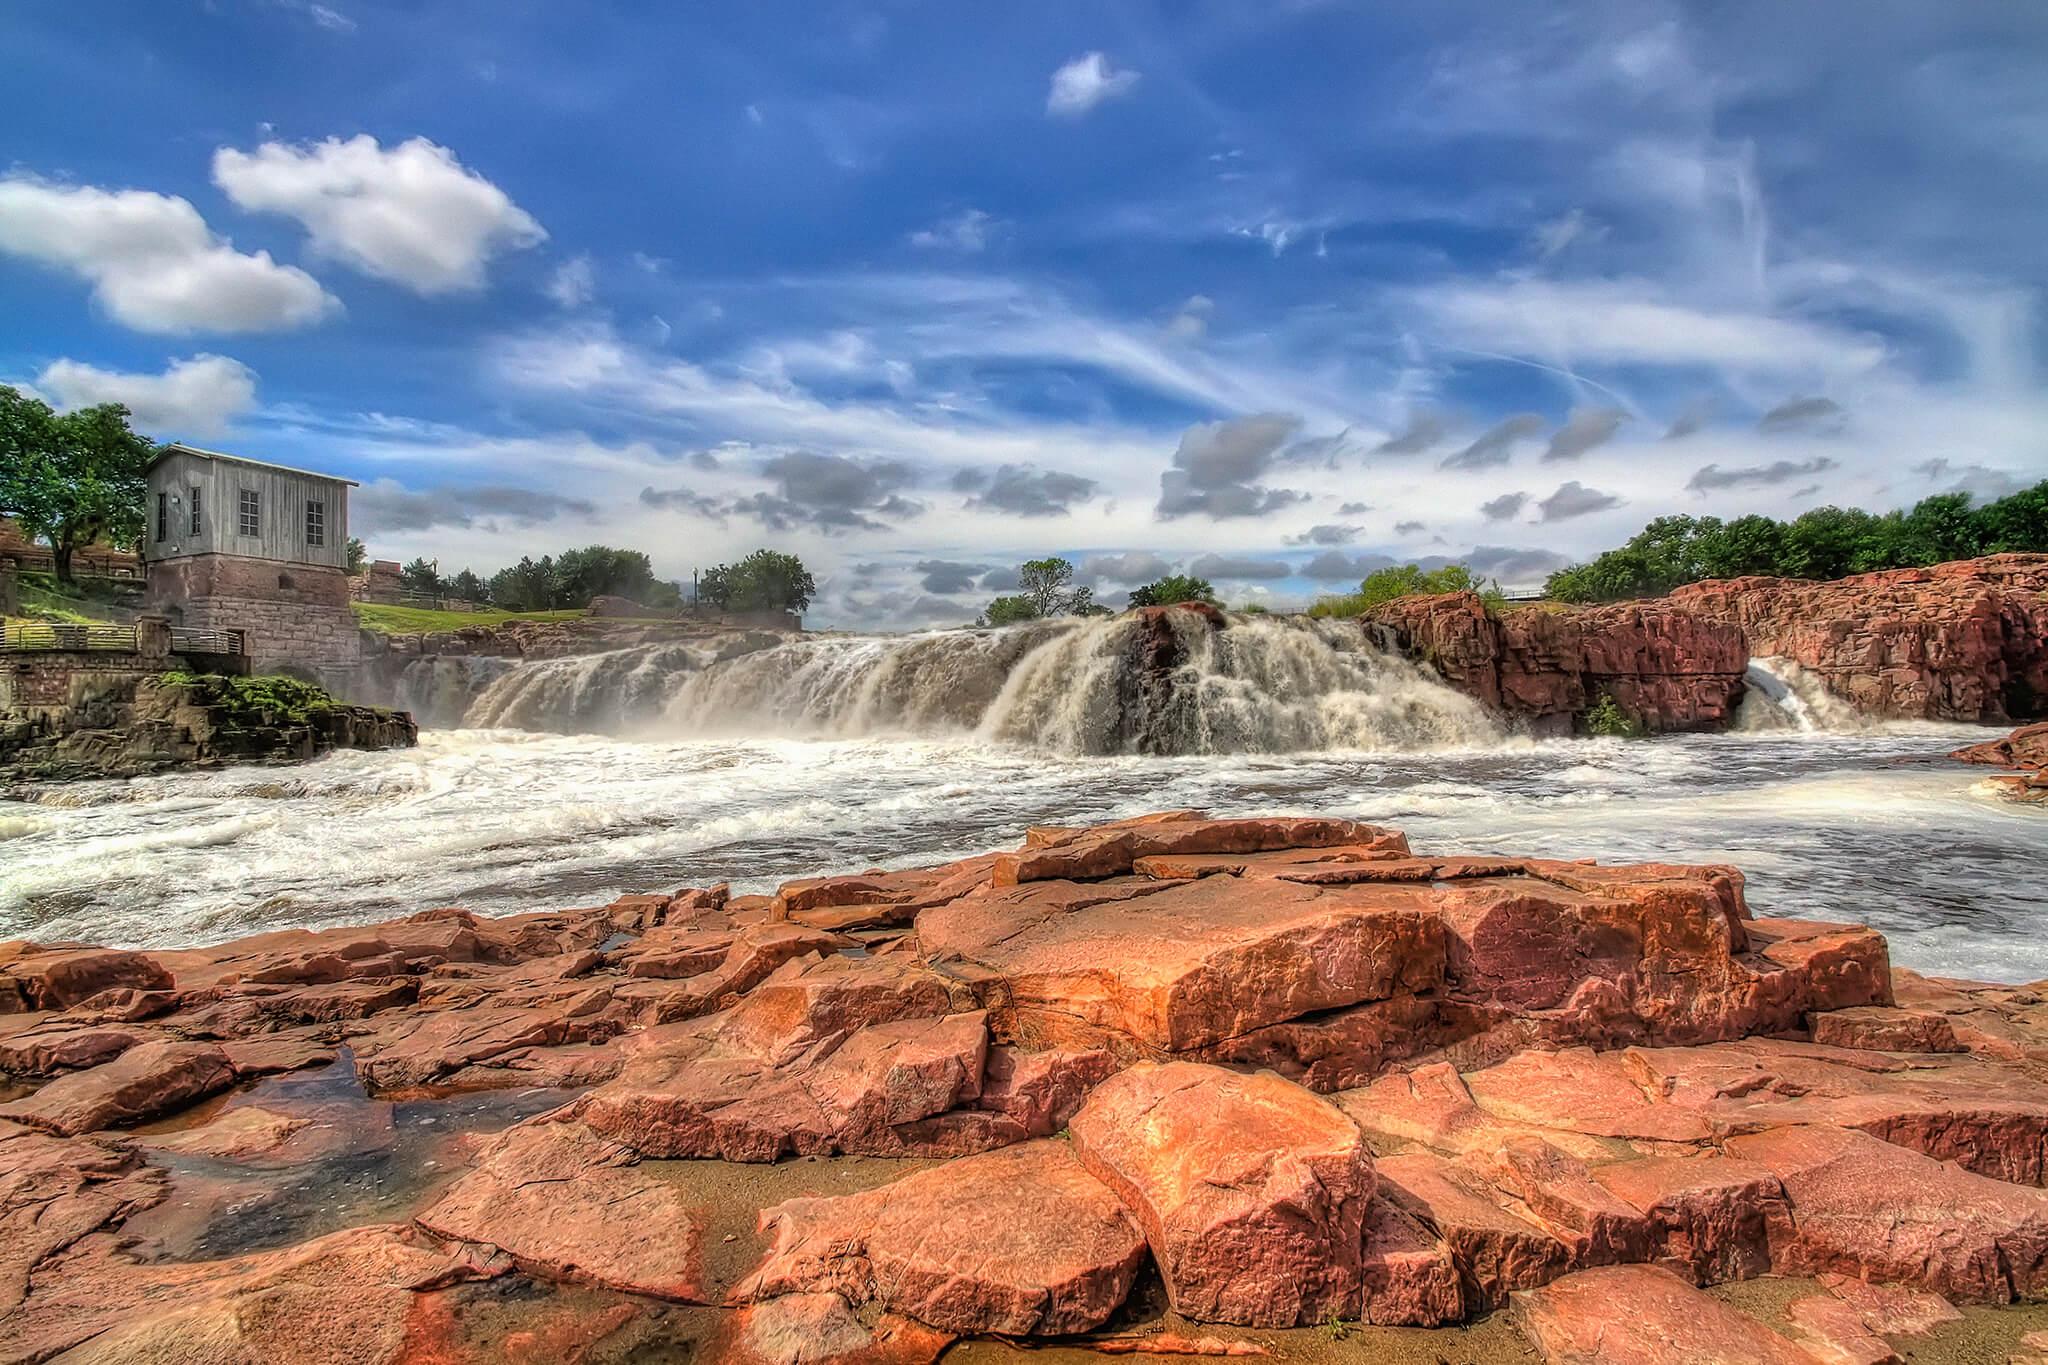 Falls Park Waterfall in Sioux Falls